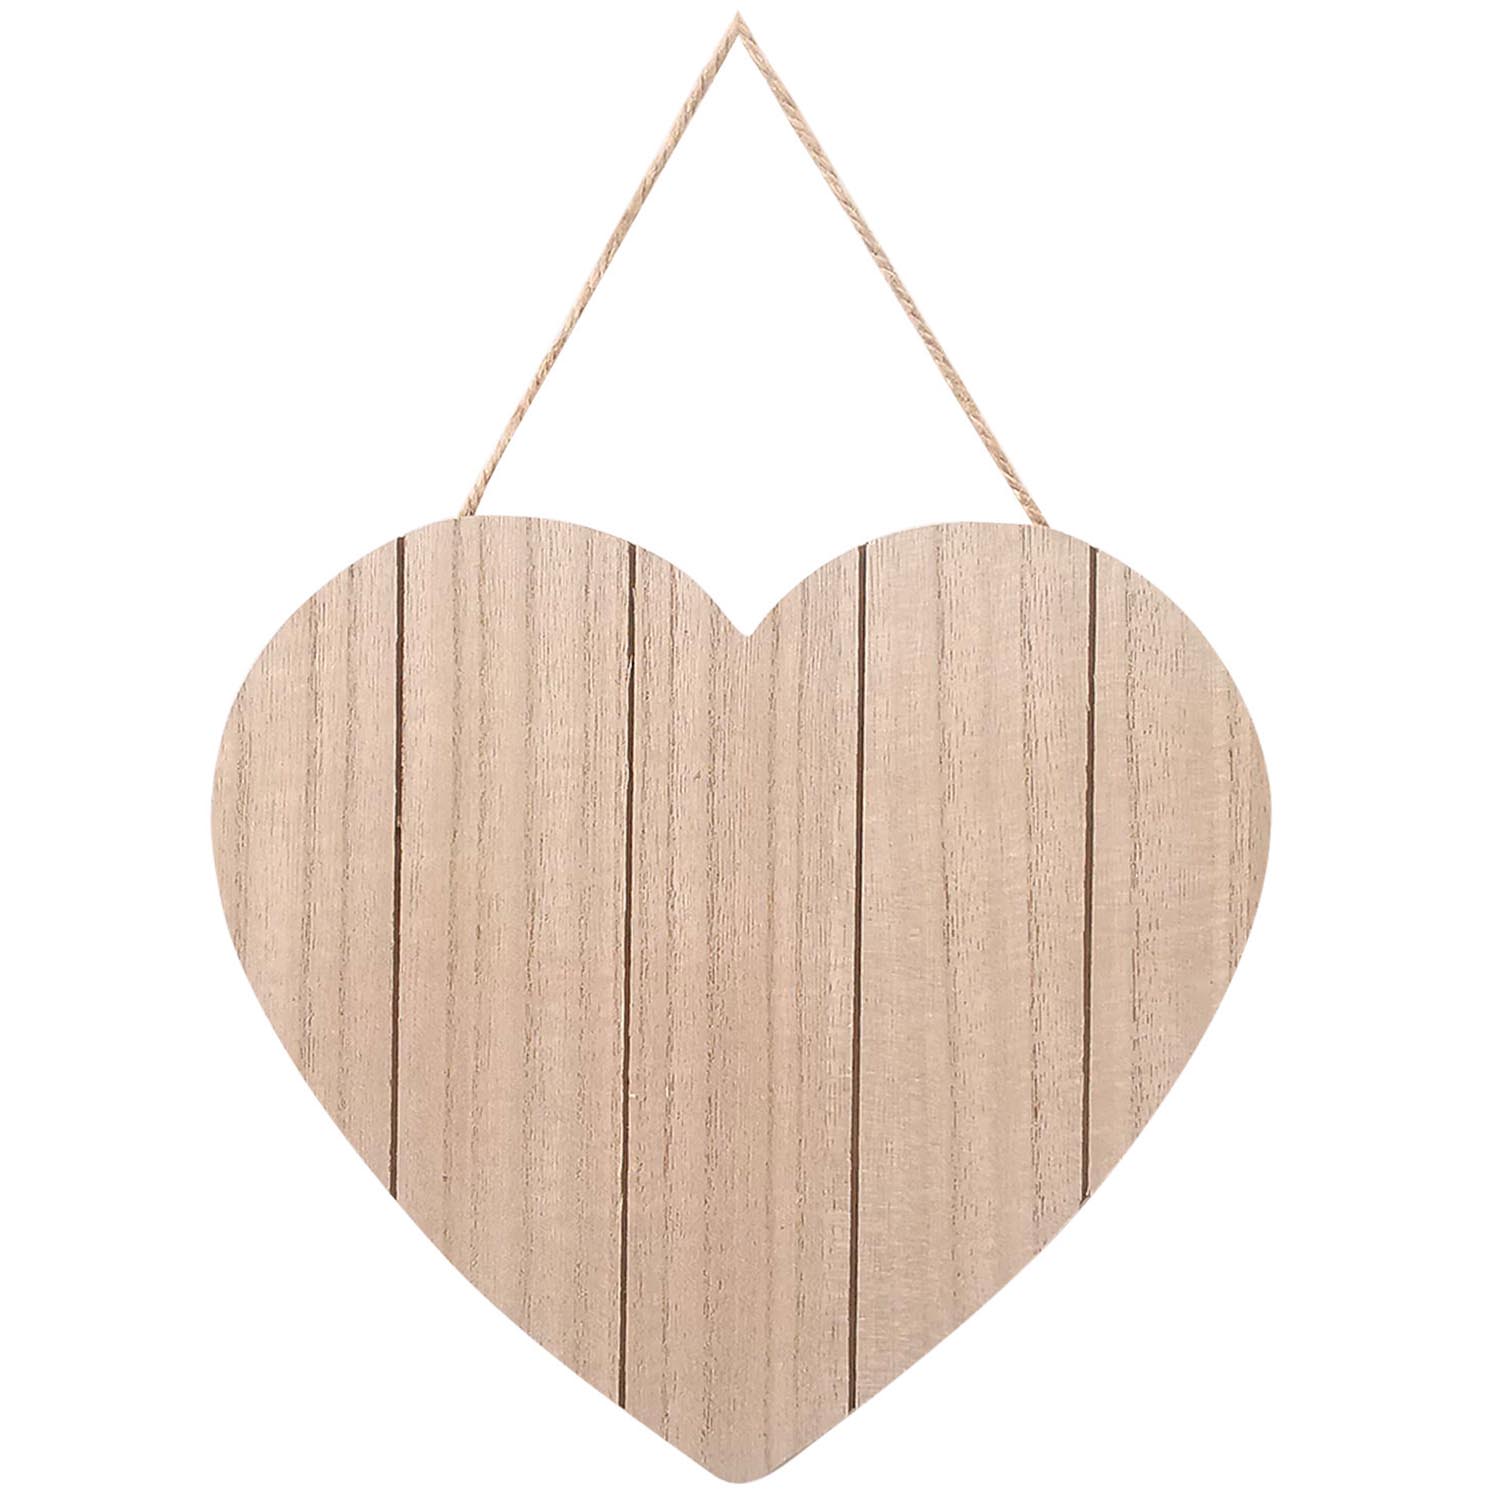 Wood Hanging Sign - Heart Image